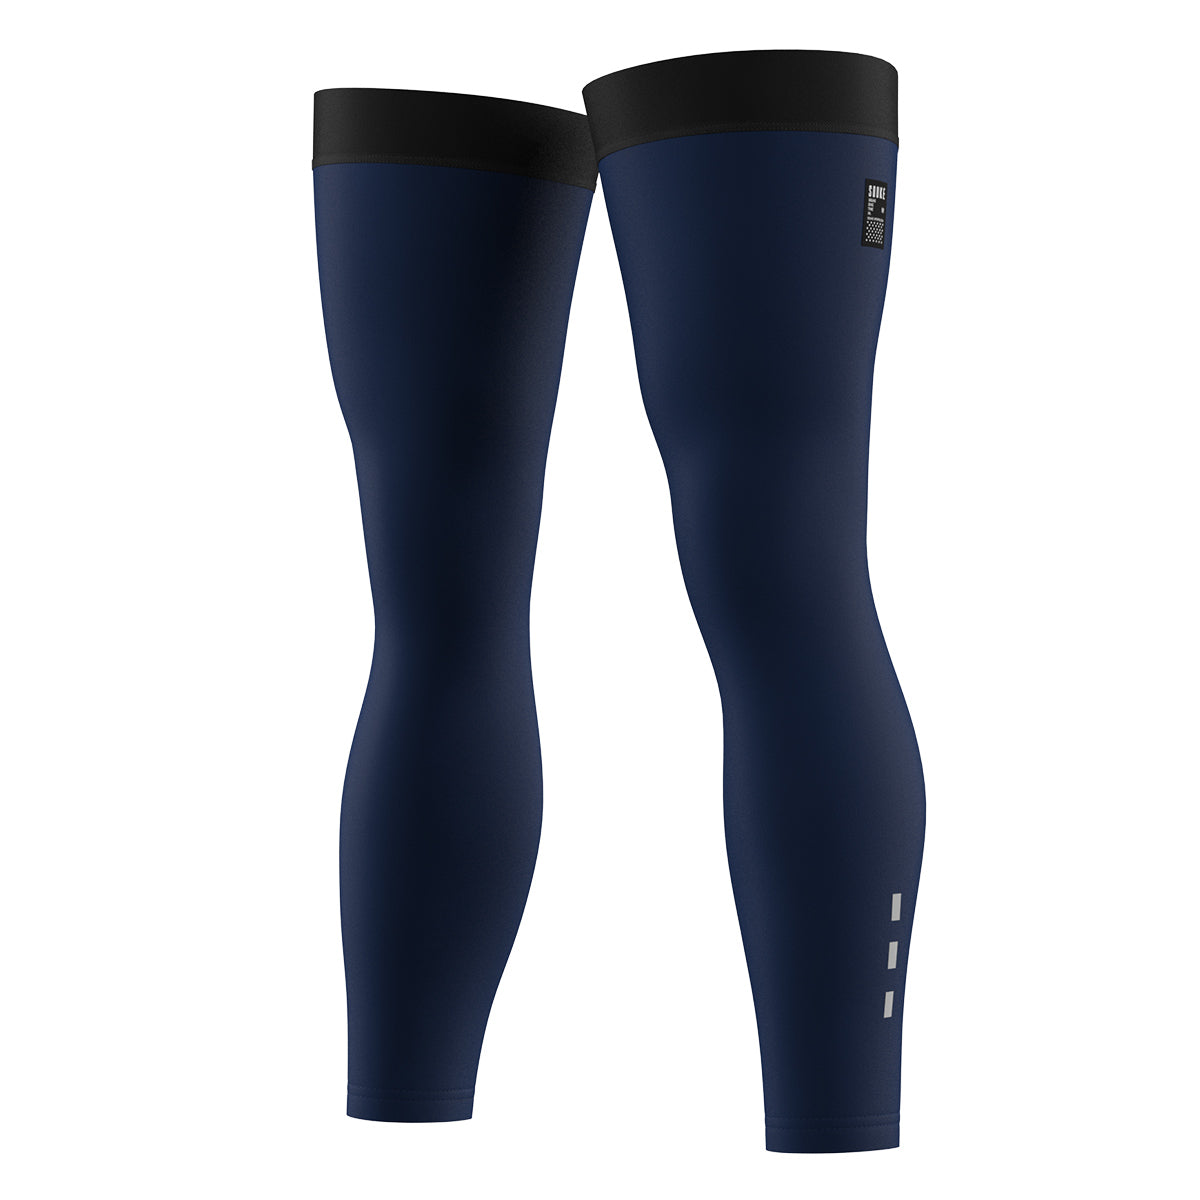 leg sleeve, men's bottom,cycling accessories, cycling protection, autumn cyclingclothes, Navy cycling accessories, (6793726787697)